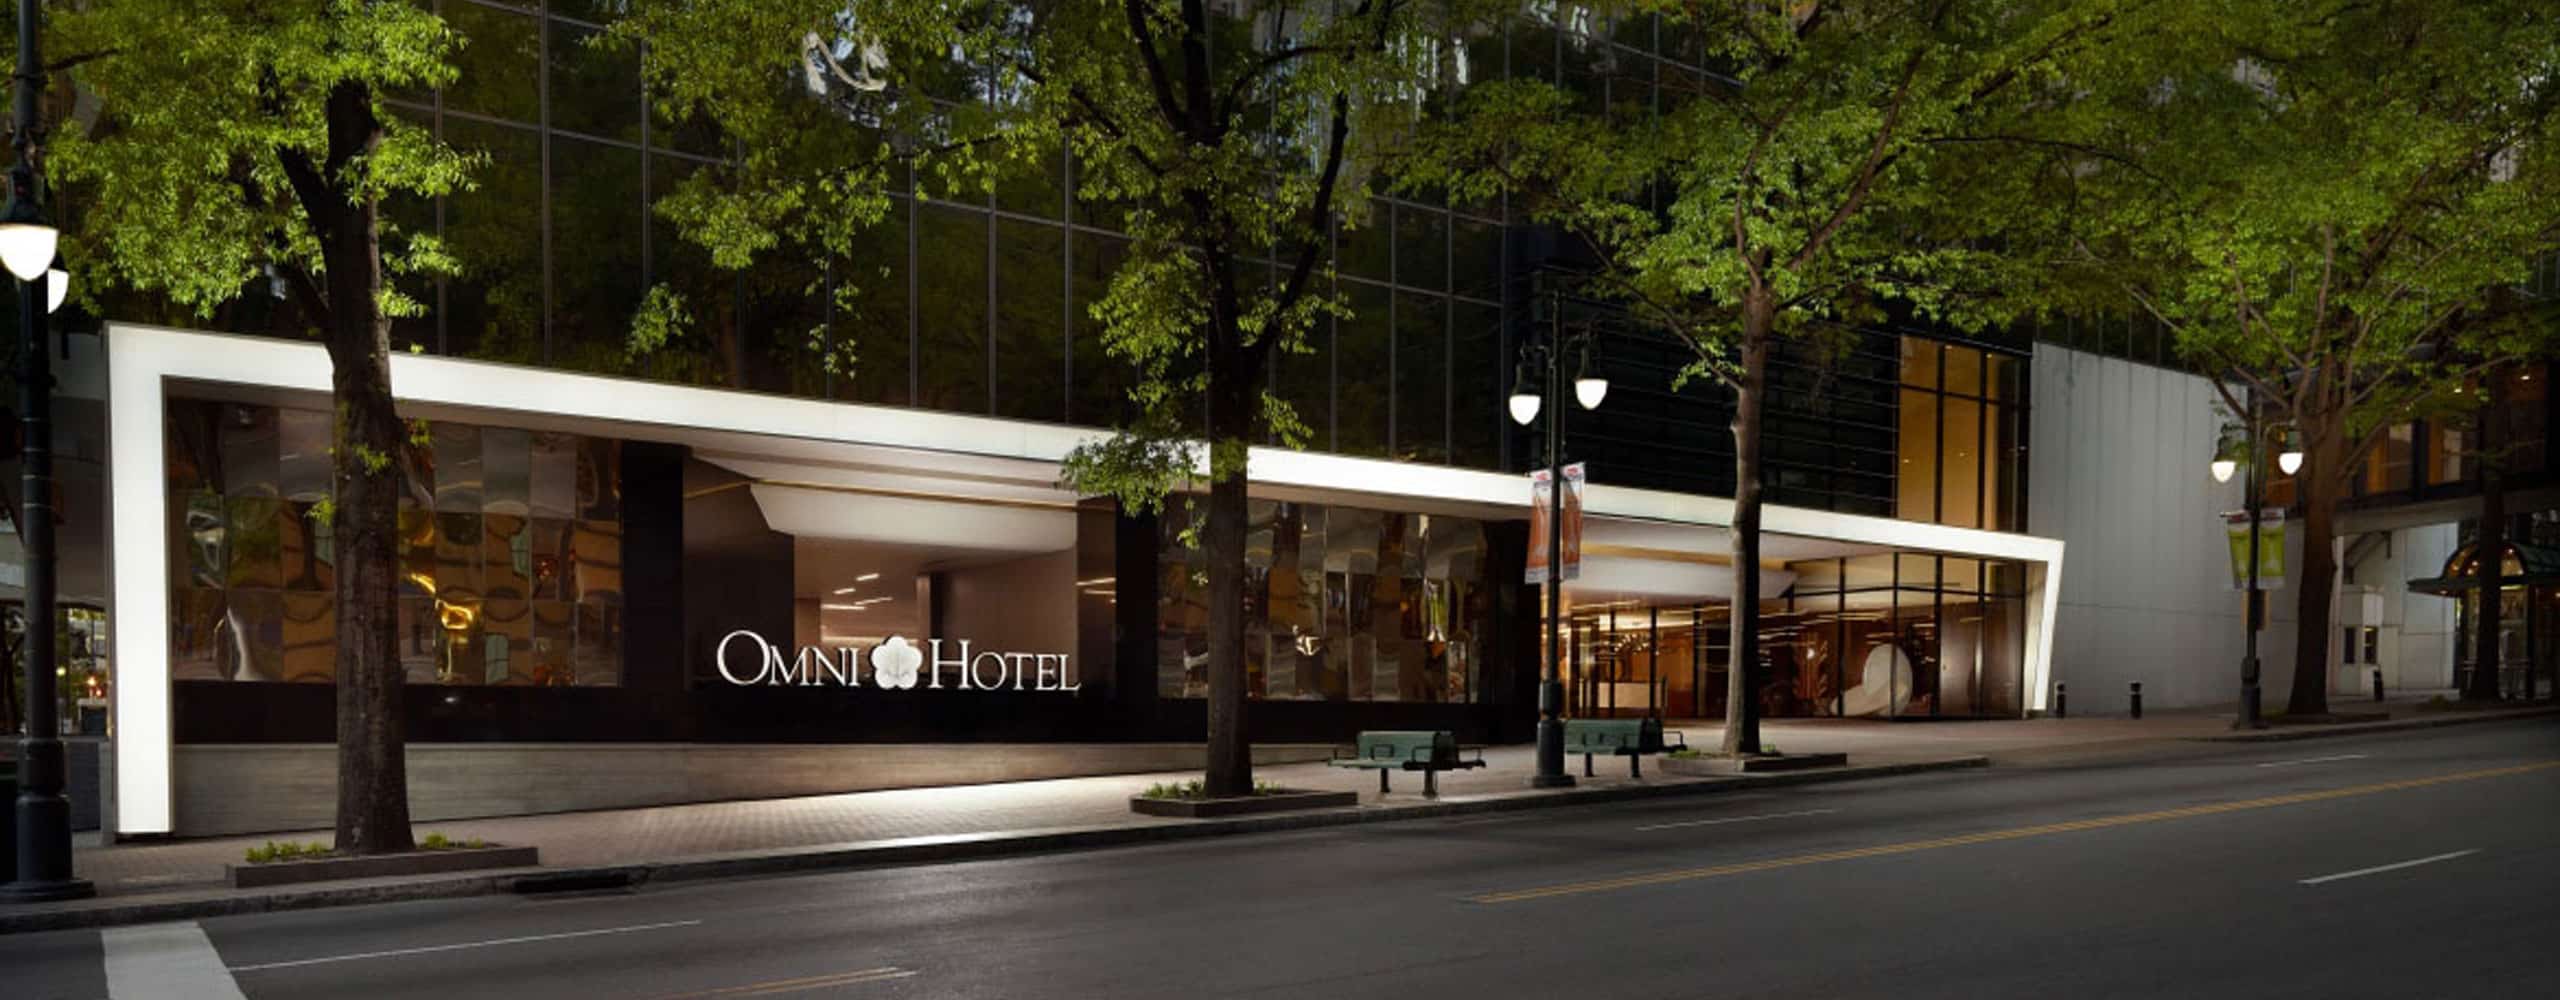 Onmi Hotel Charlotte Exterior, commercial hospitality architecture and interior design